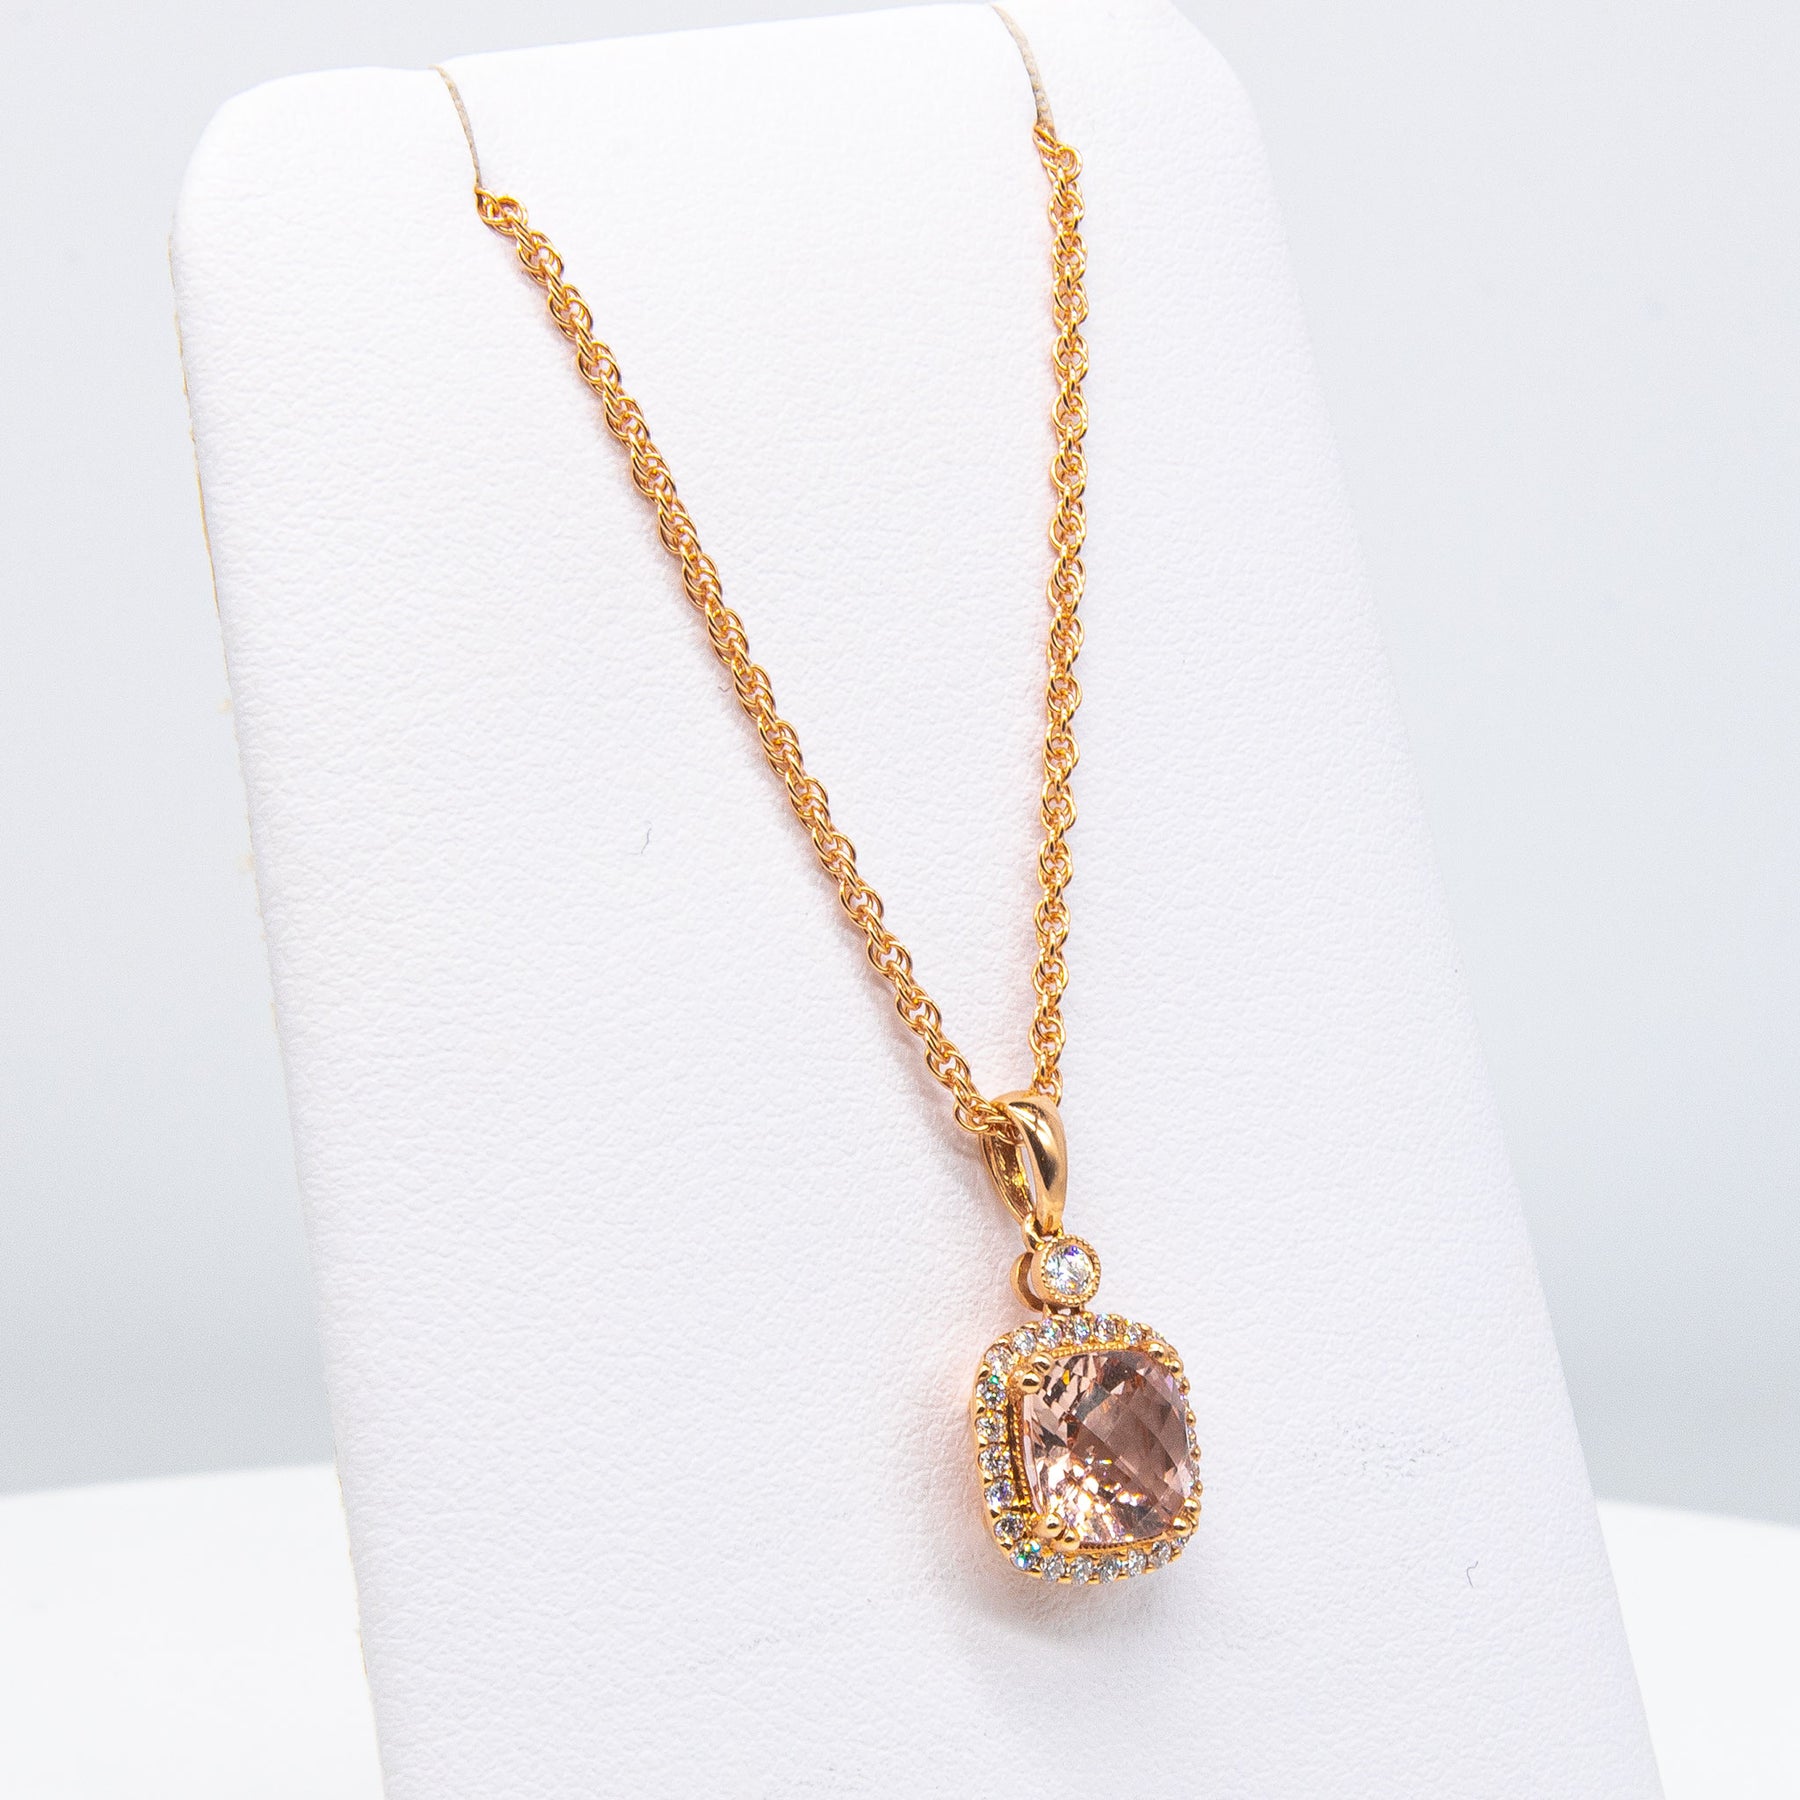 19.16ct Morganite Pendant set in 18kt yellow and rose gold~ Handwrought,  Laser Welded, on 18